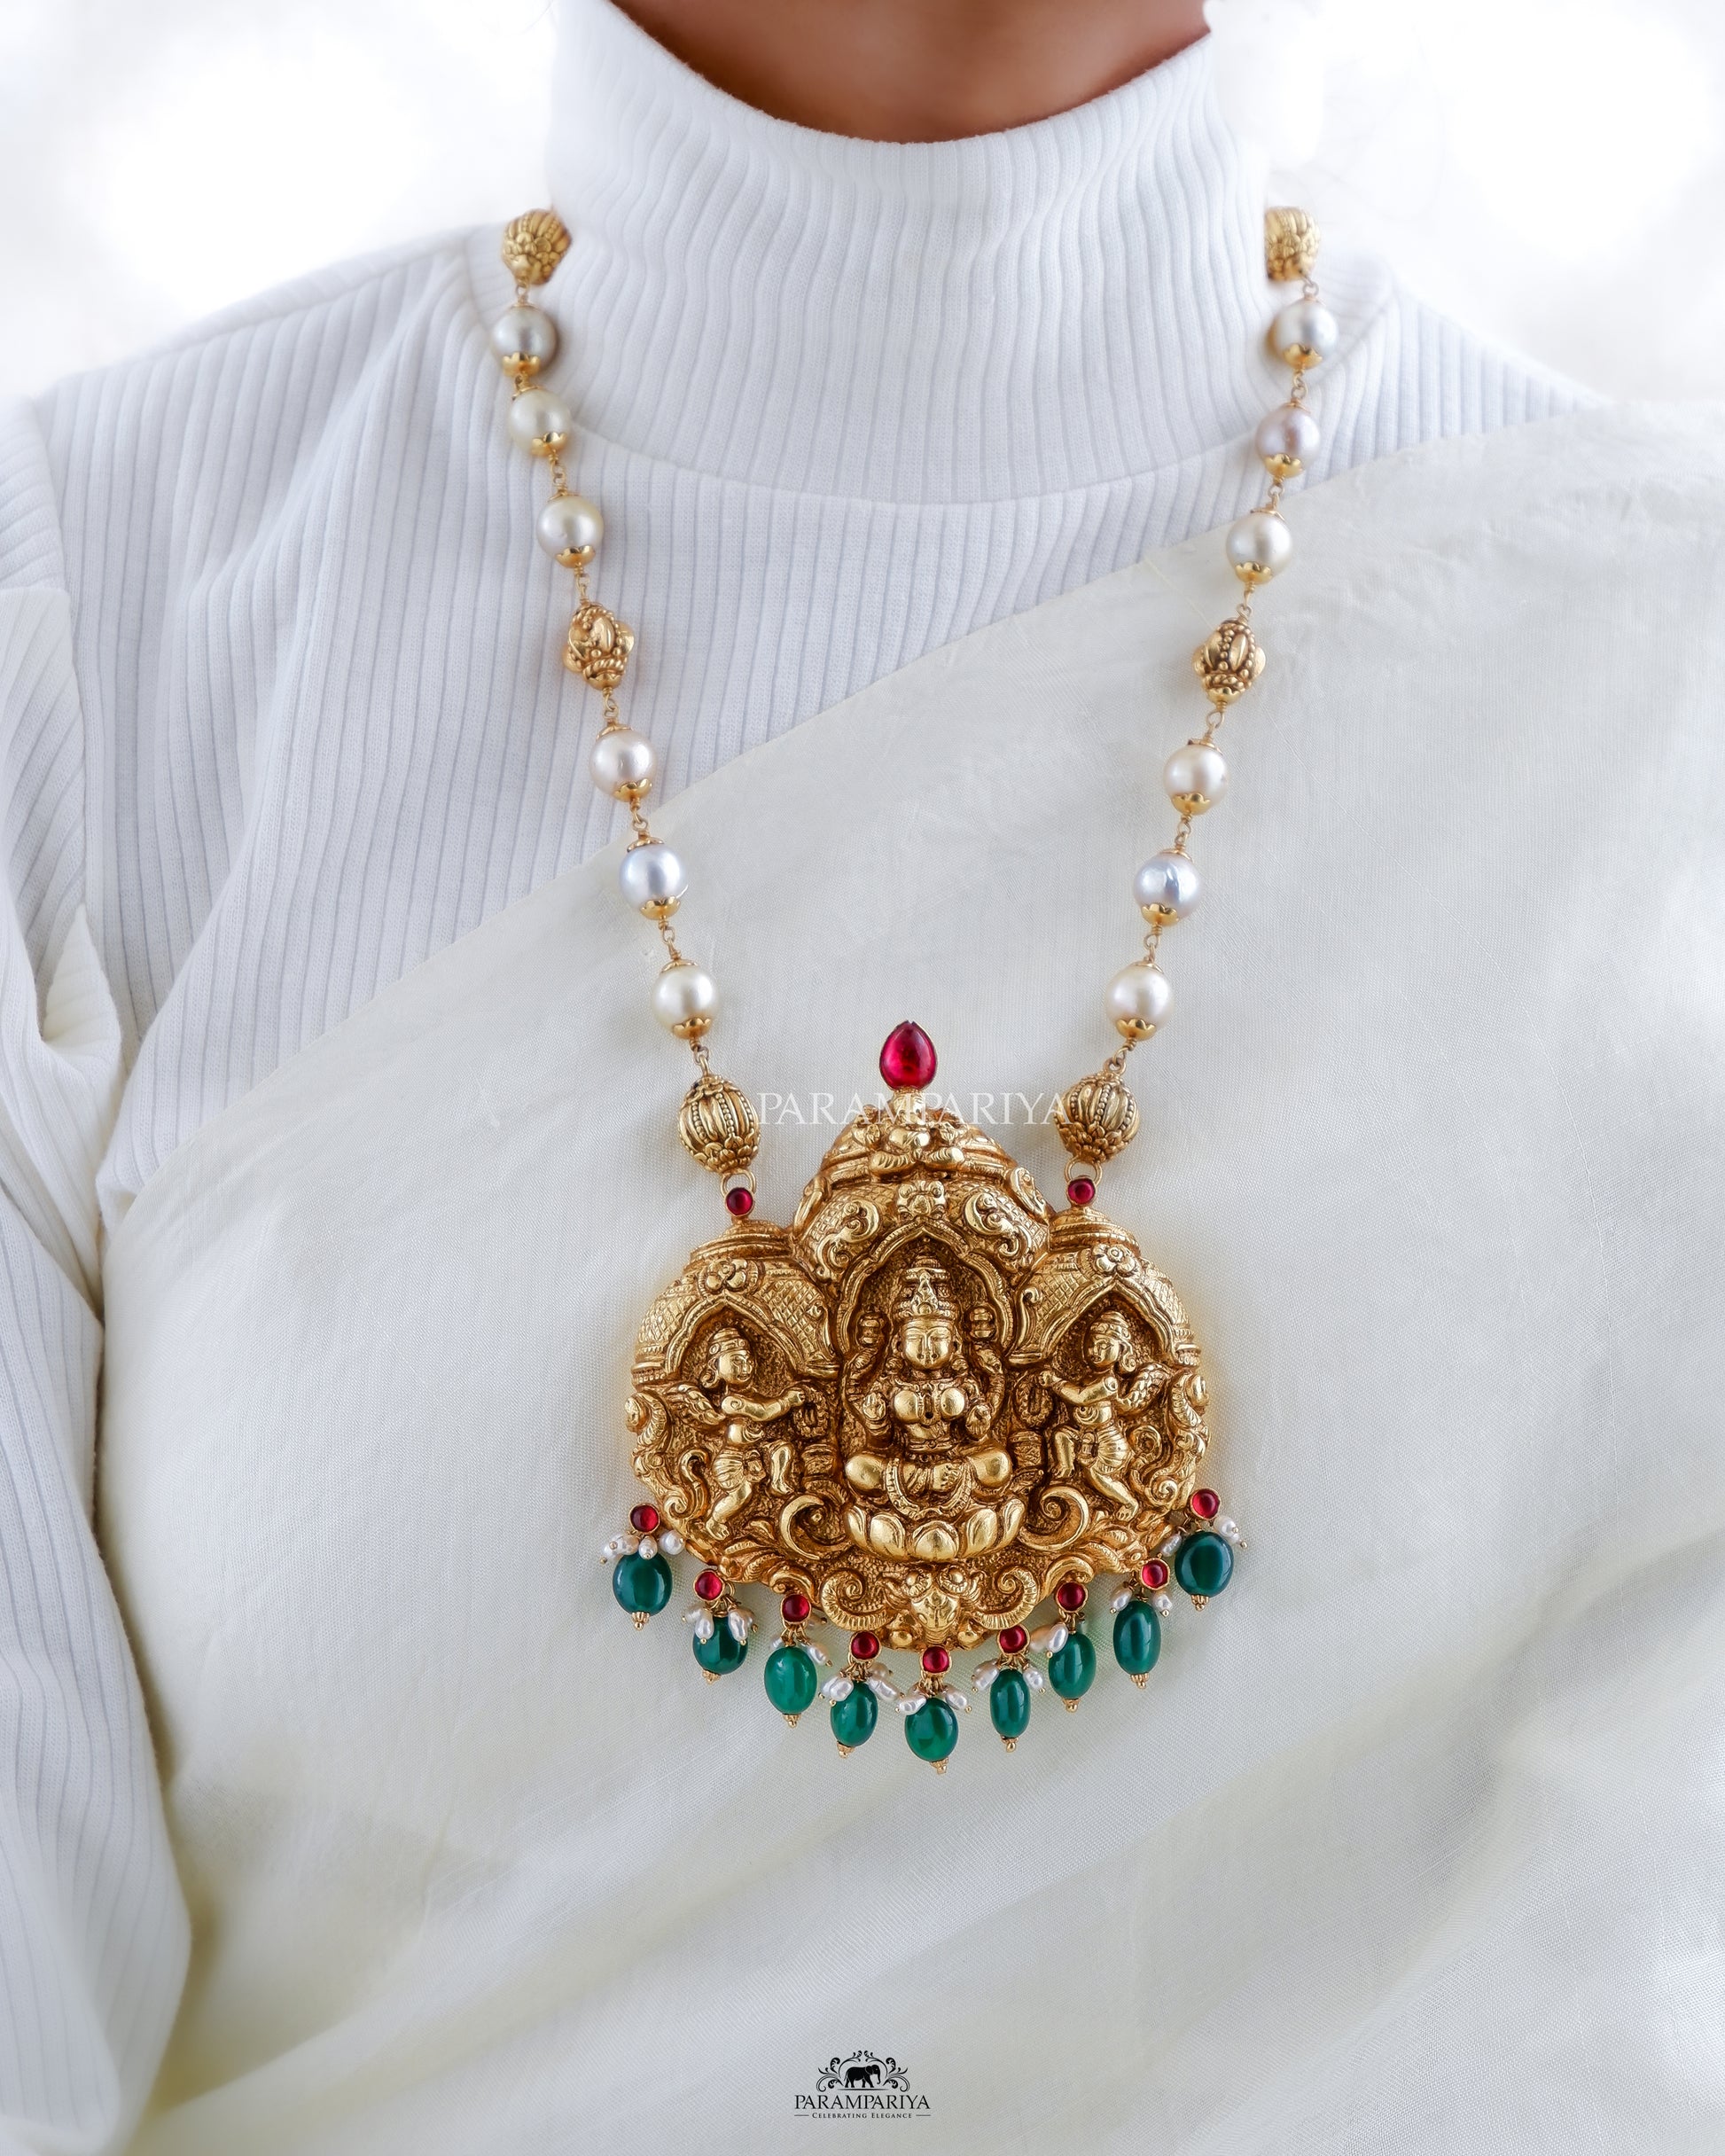 Temple necklace with lakshi pendant beaded with pearls